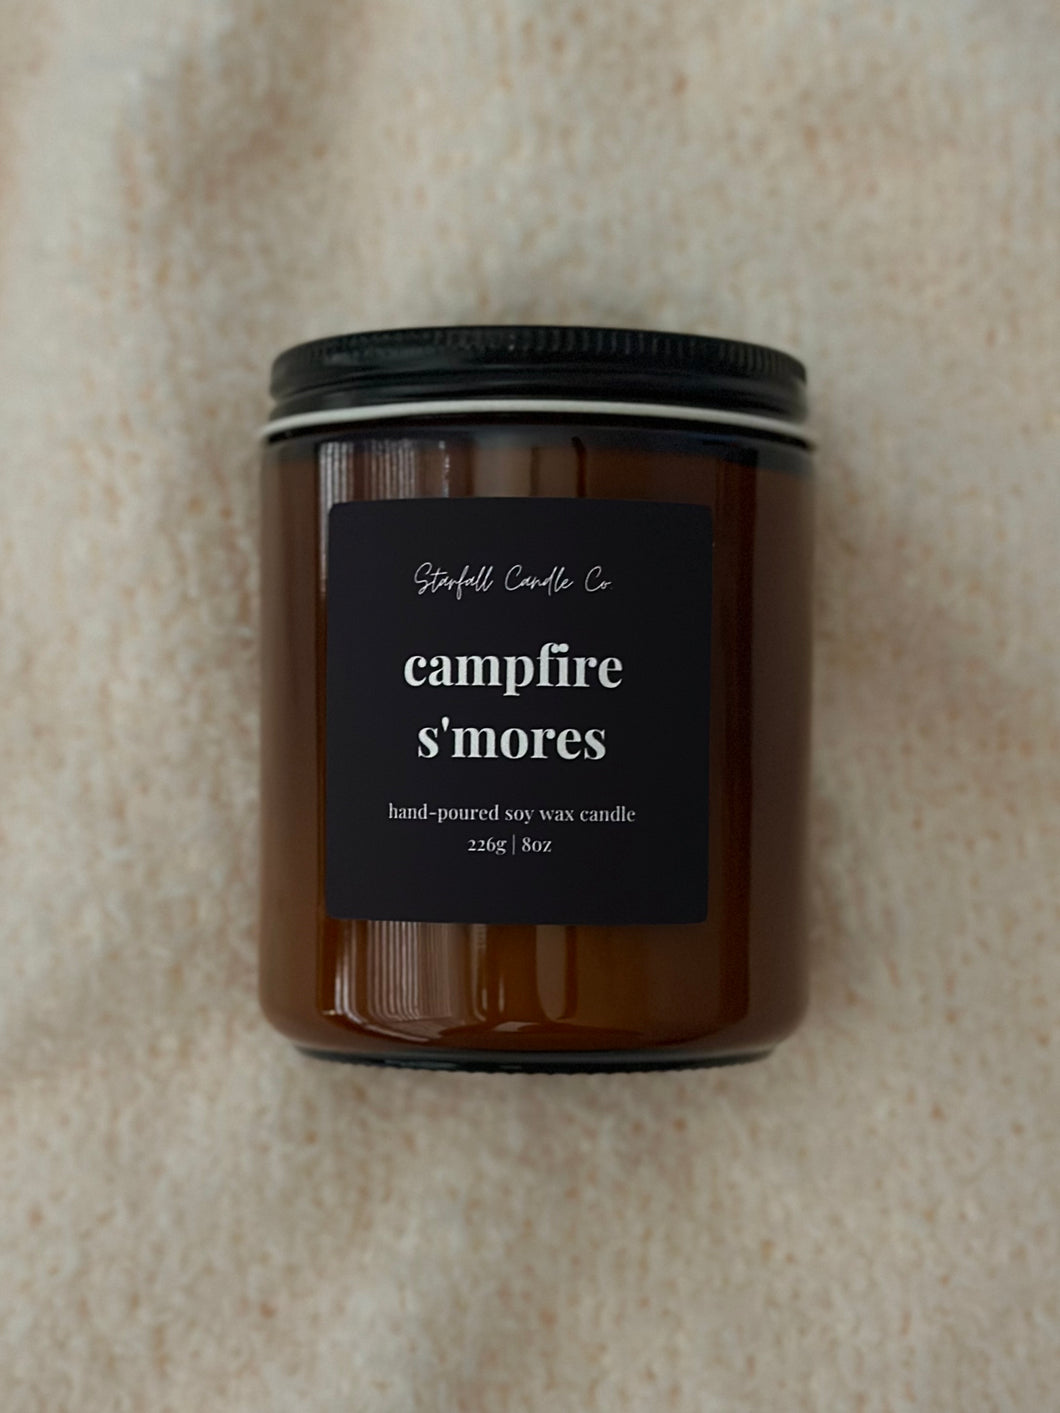 Campfire S'mores Soy Wax Candle